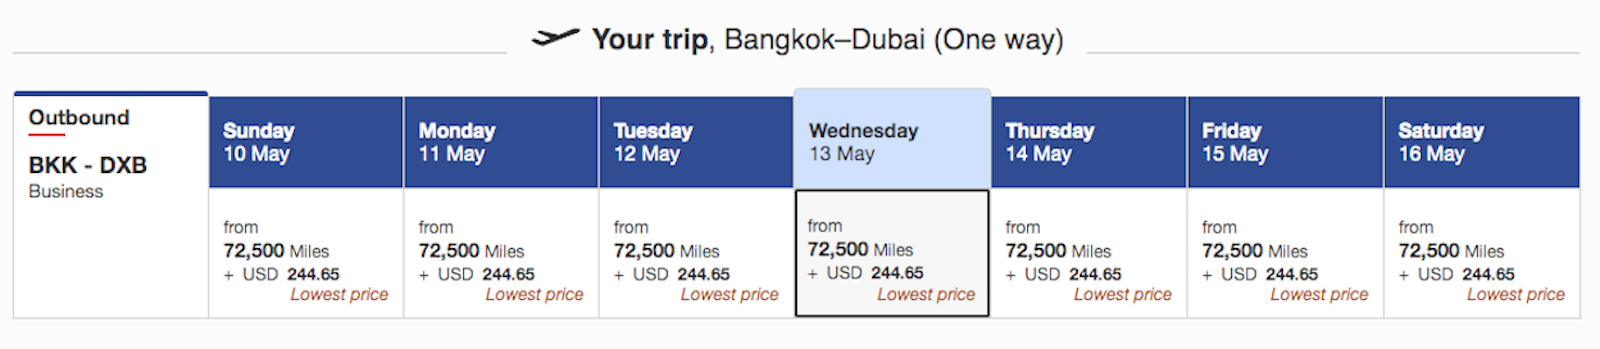 Emirates surcharges and fees on flights from Thailand